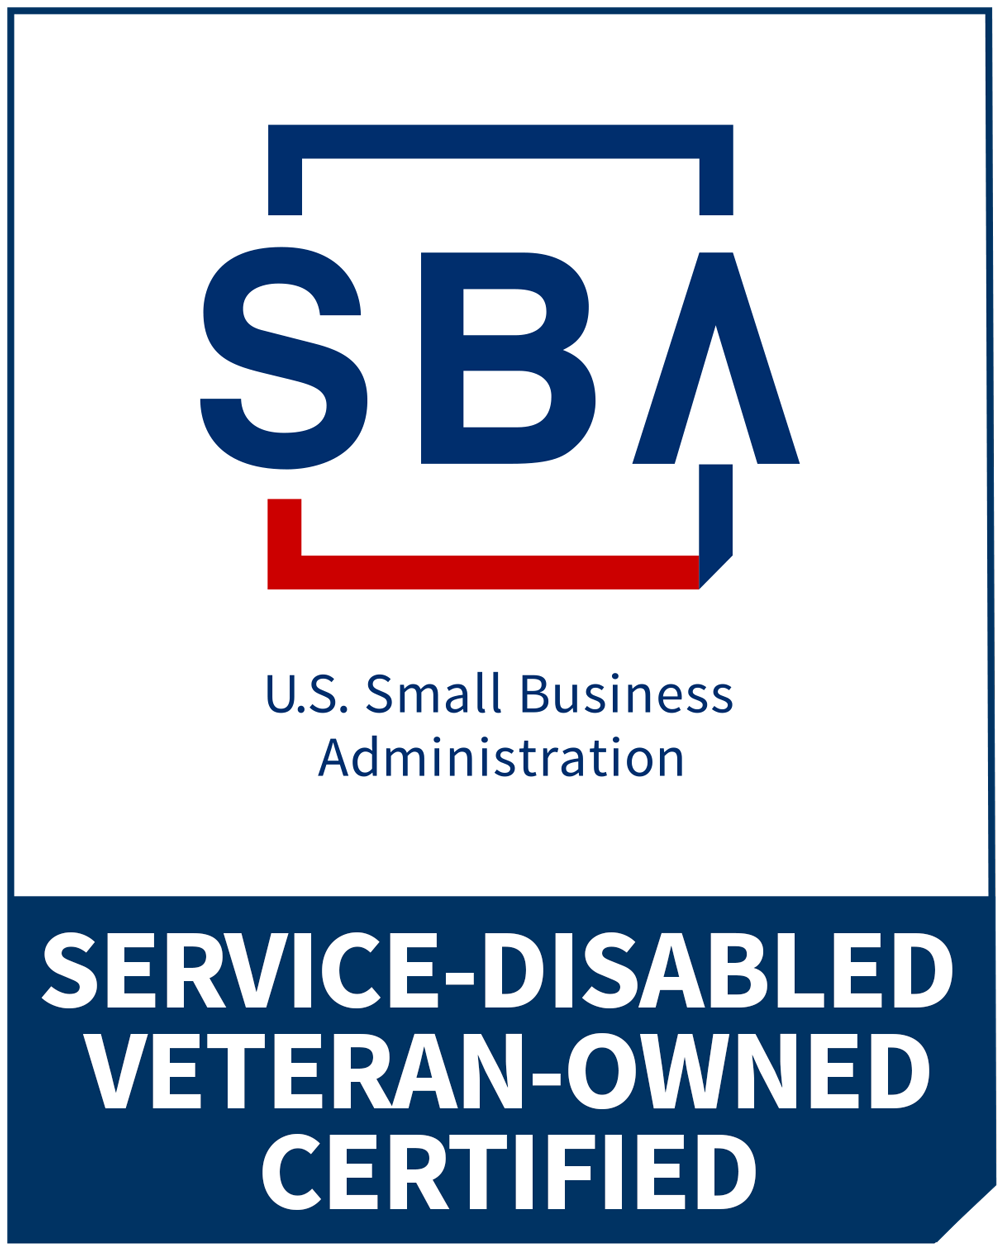 Service disabled veteran-owned certified